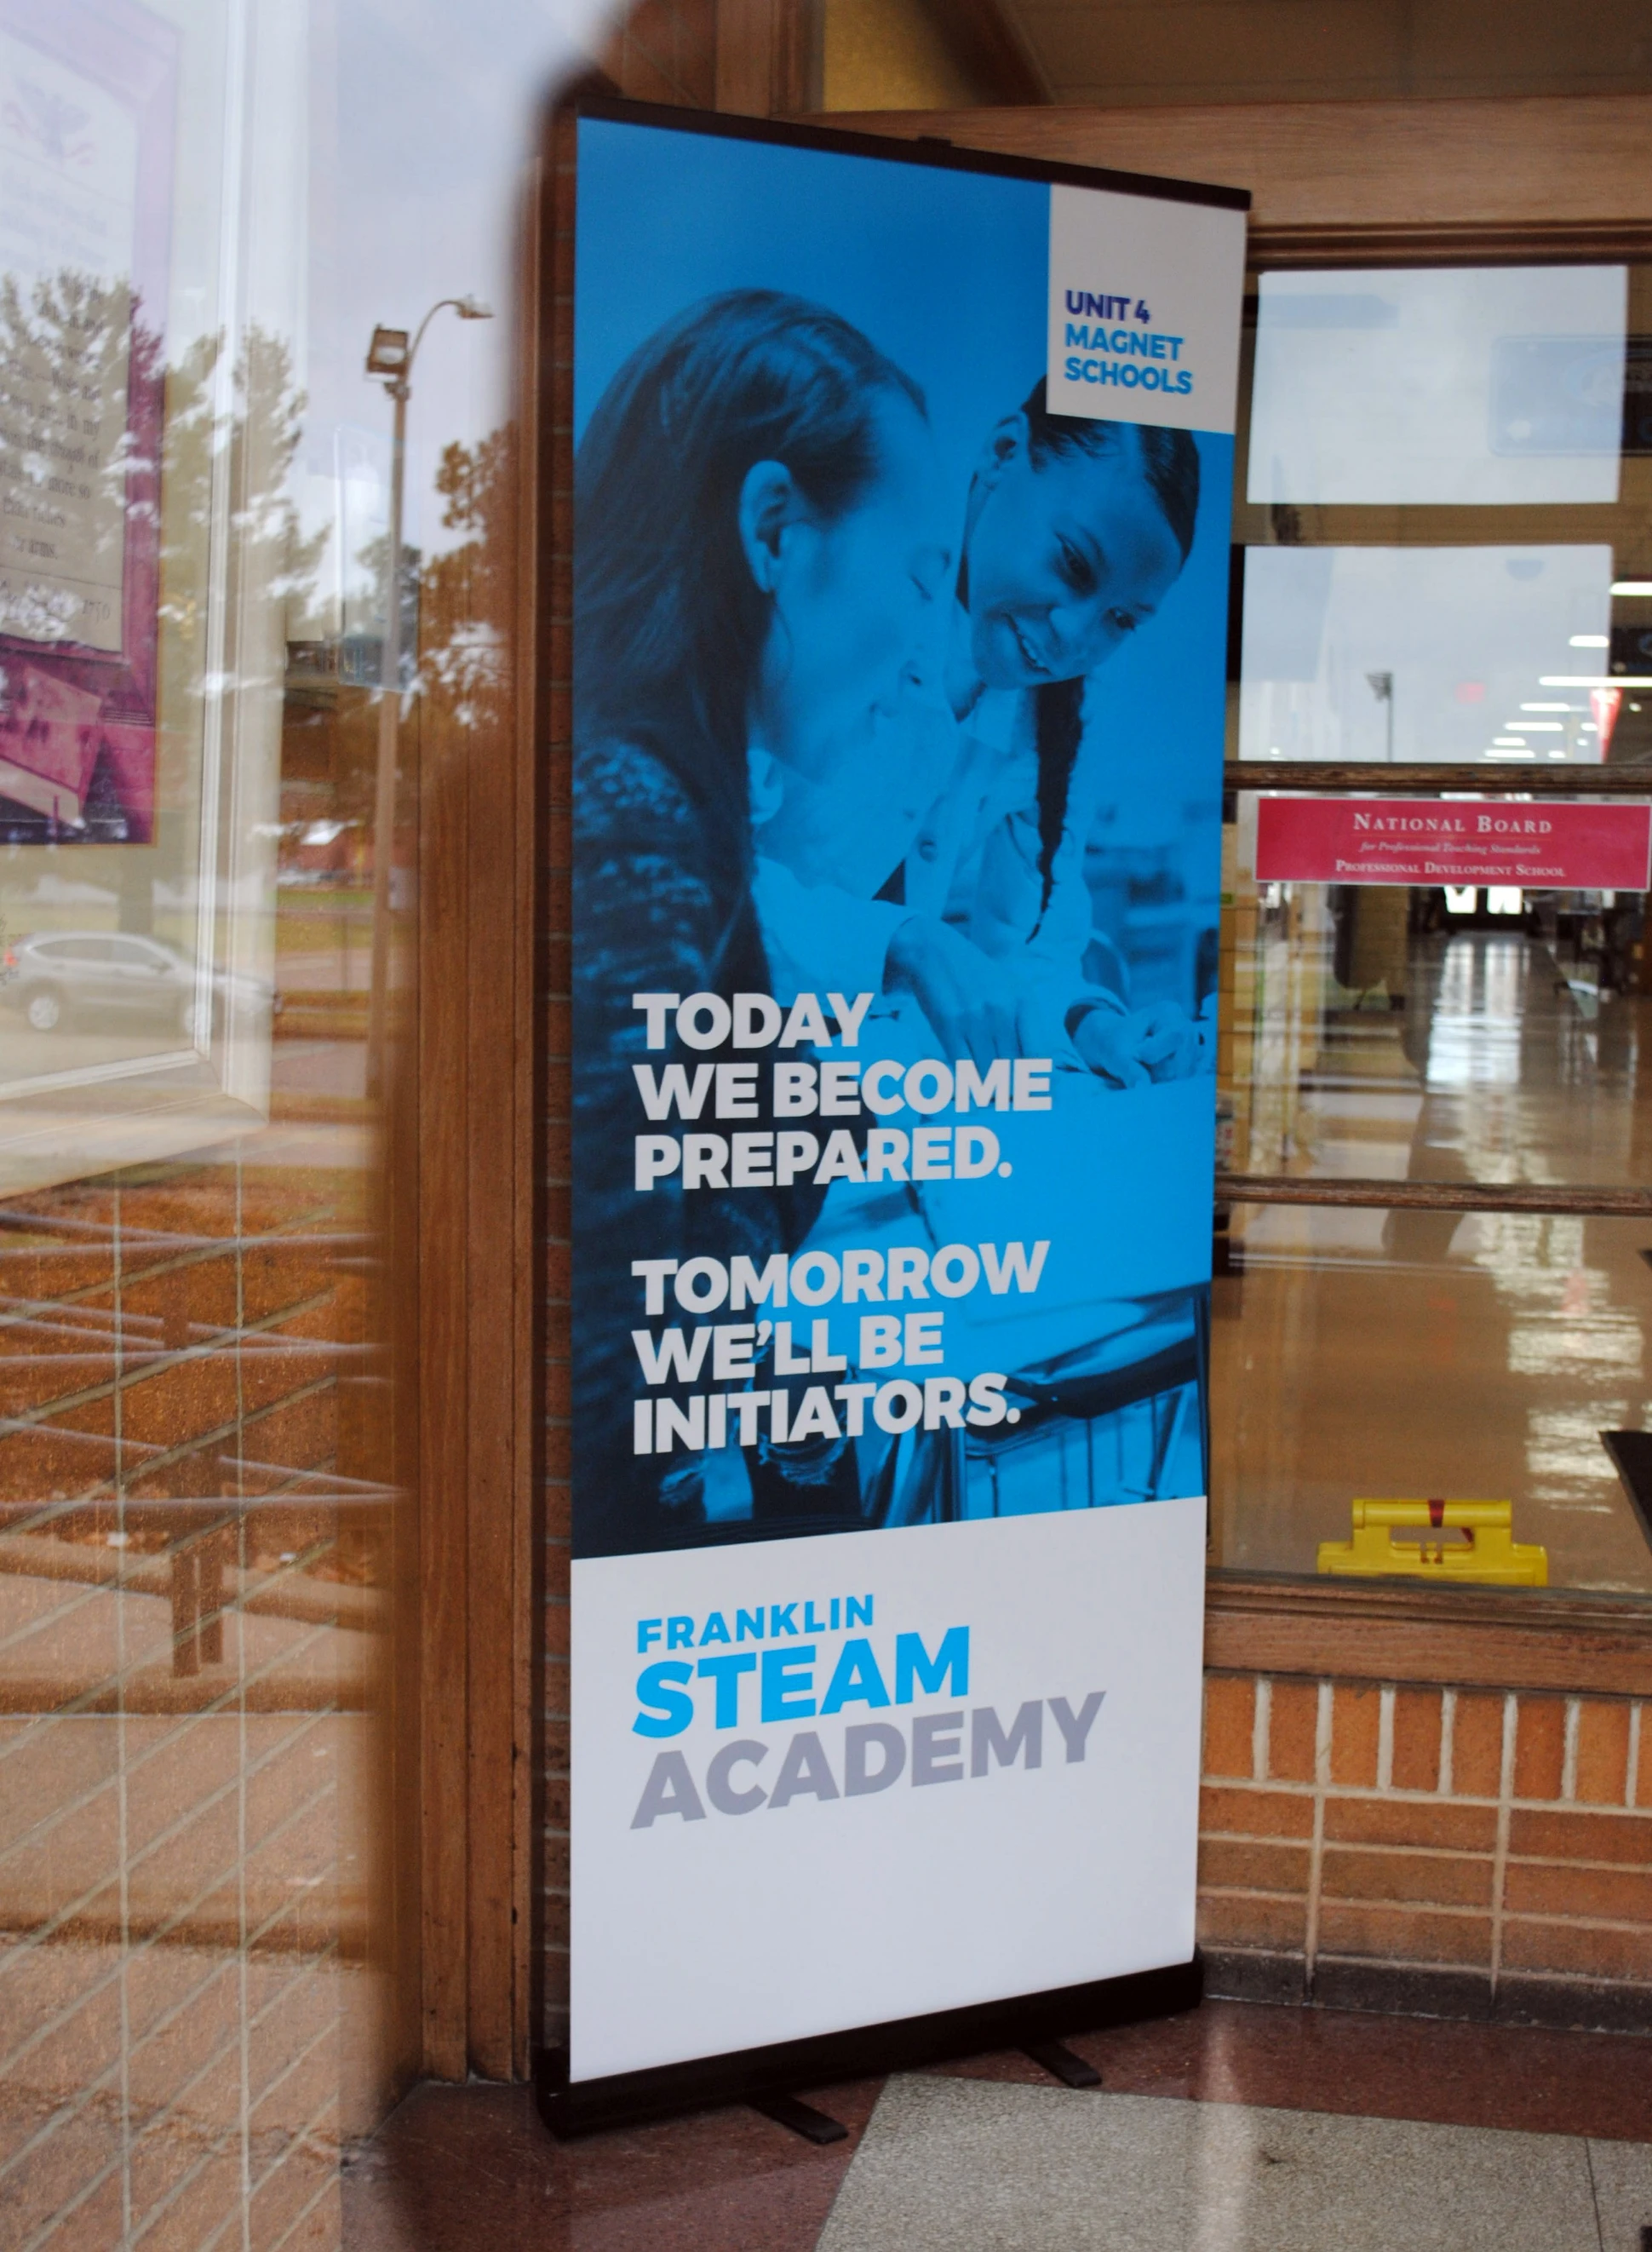 A banner advertising the stam academy in front of a building.